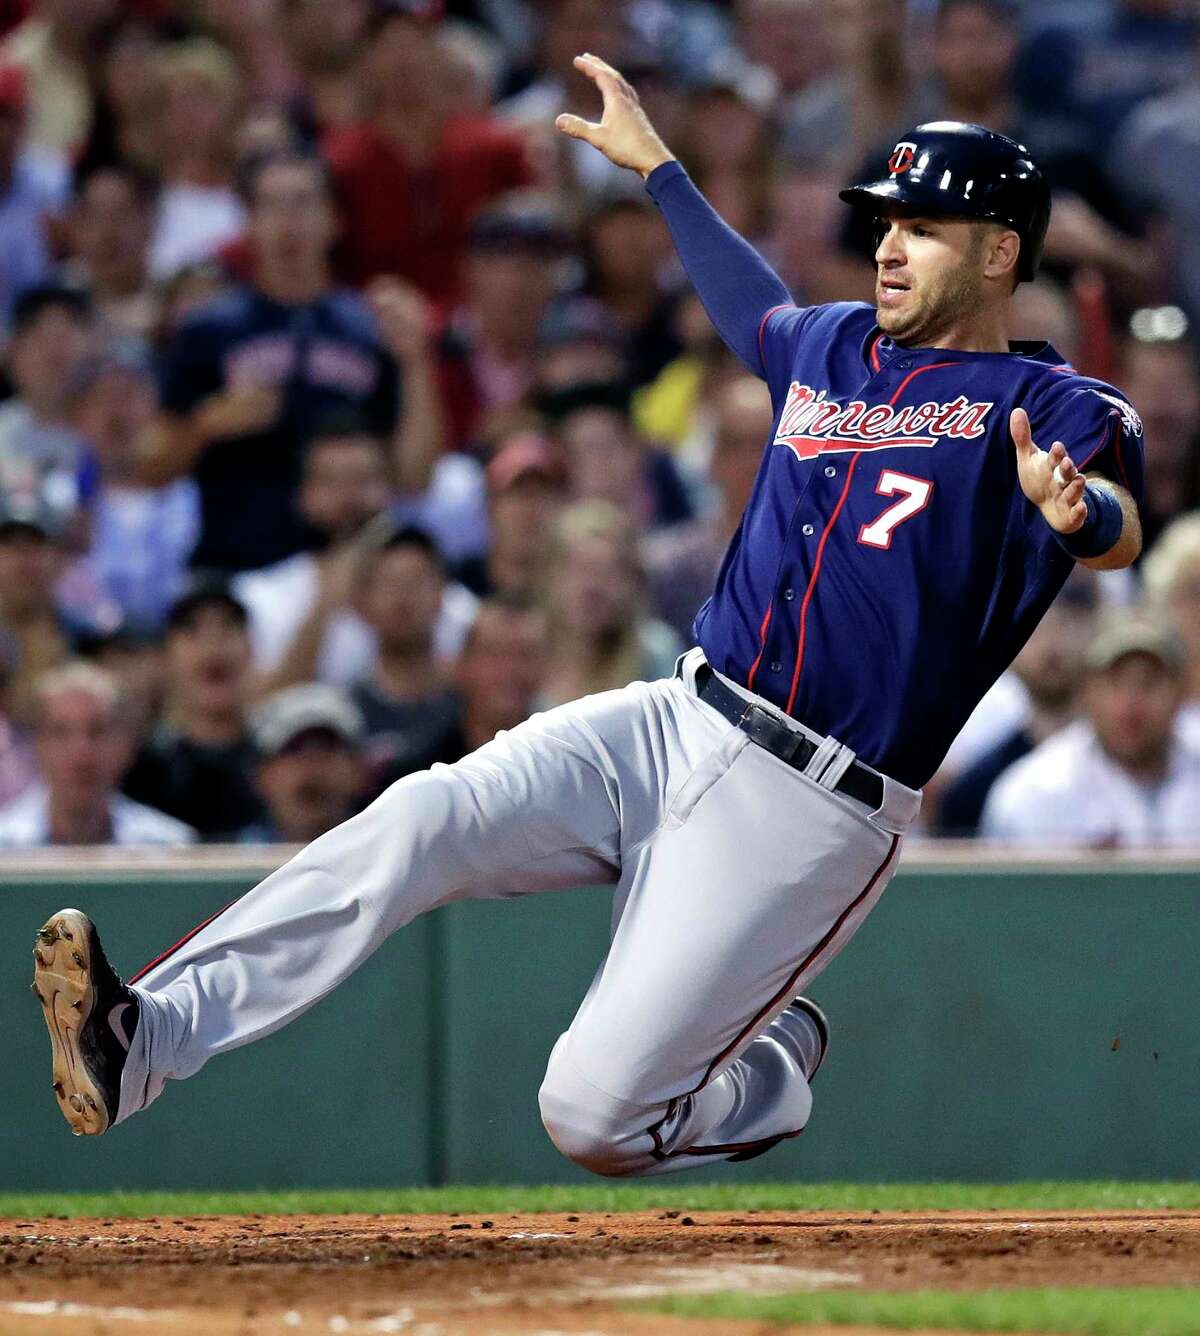 Cretin-Derham Hall :: Twins Announce Plans to Honor Mauer by